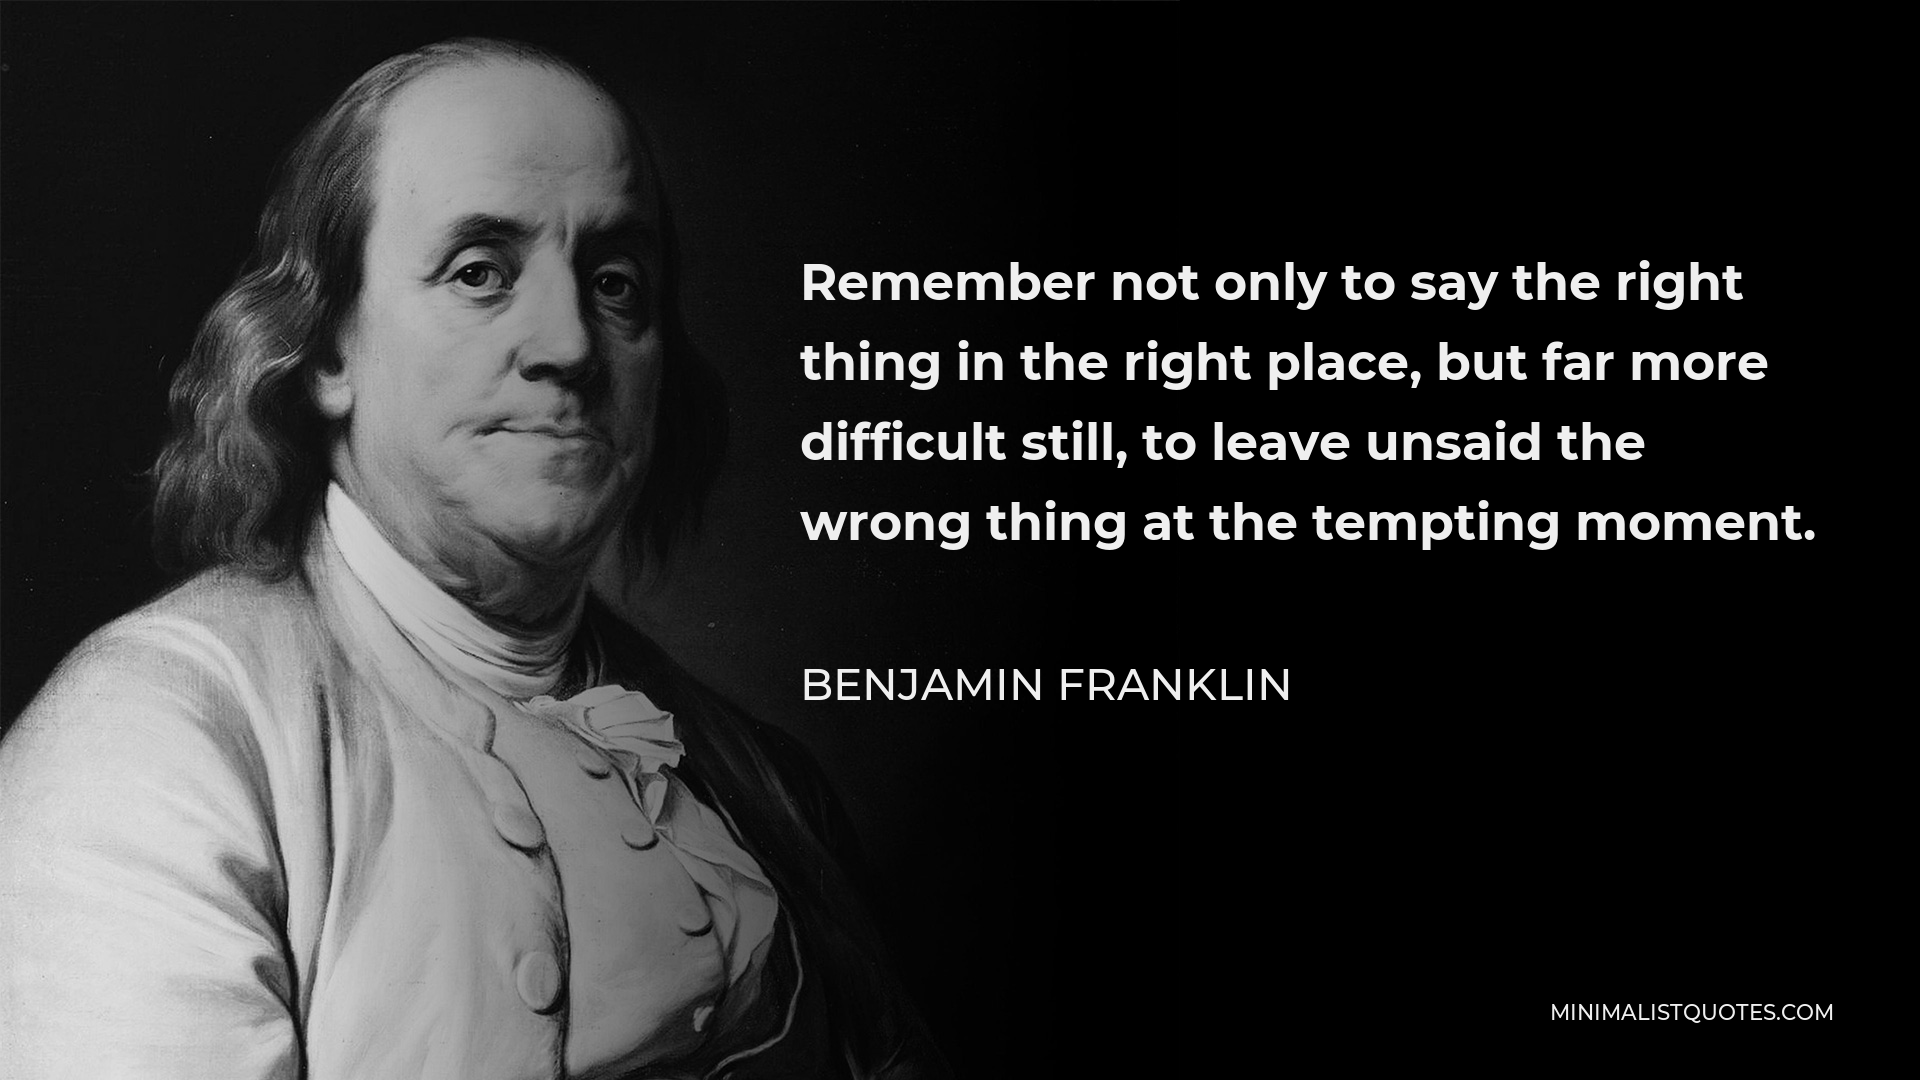 Benjamin Franklin Quote - Remember not only to say the right thing in the right place, but far more difficult still, to leave unsaid the wrong thing at the tempting moment.